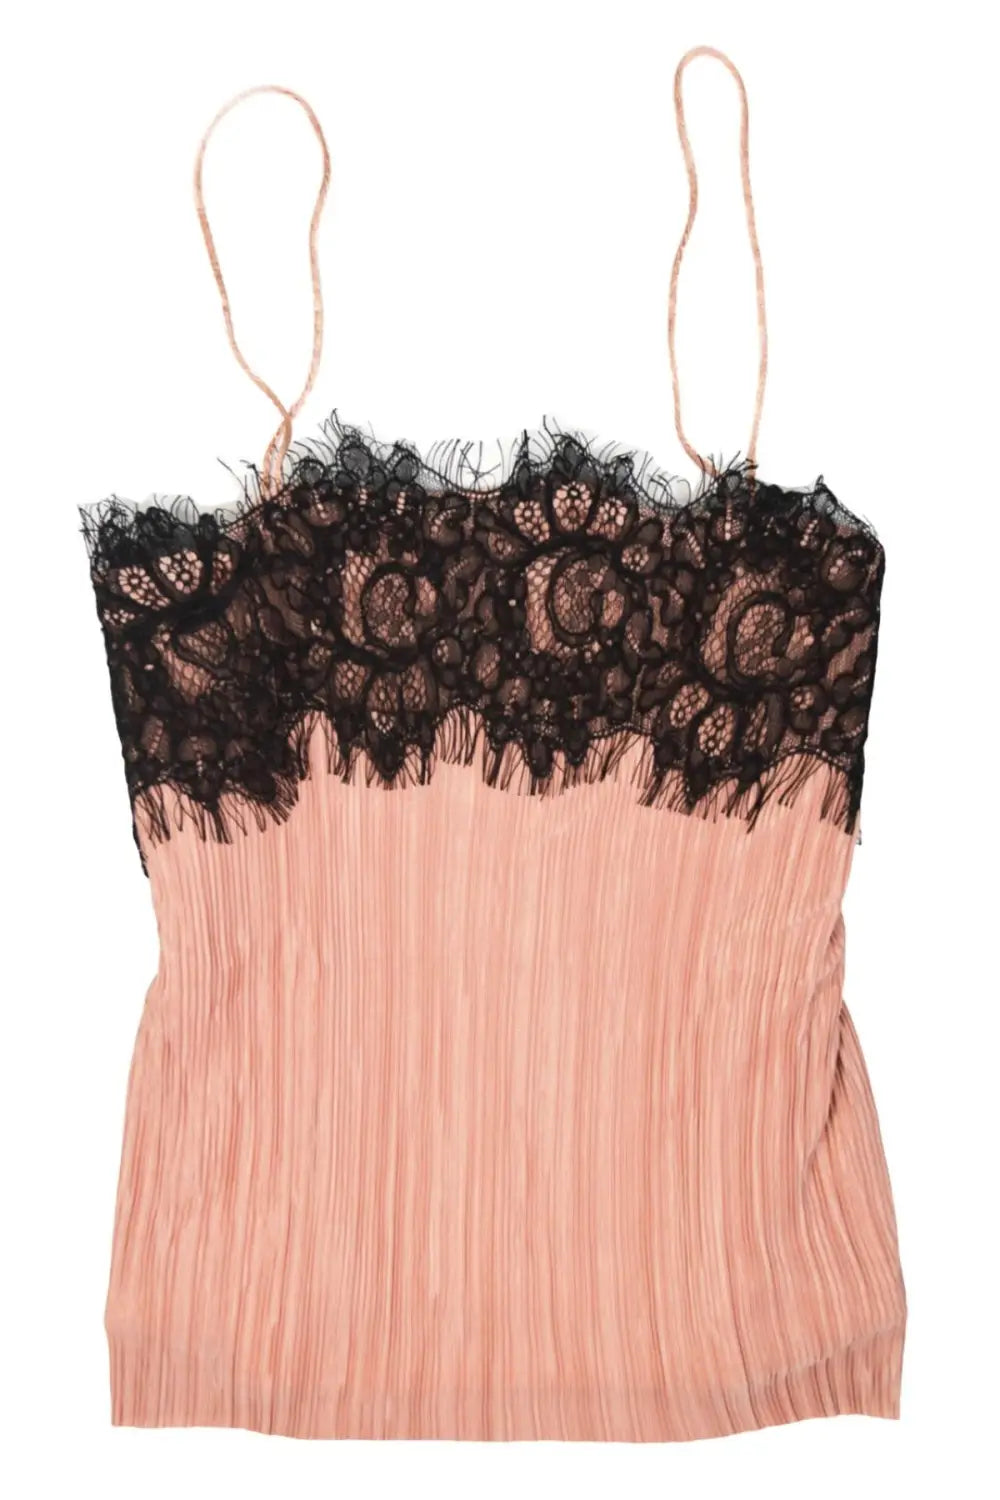 Urban Outfitters Eyelash Lace Trim Cami Top